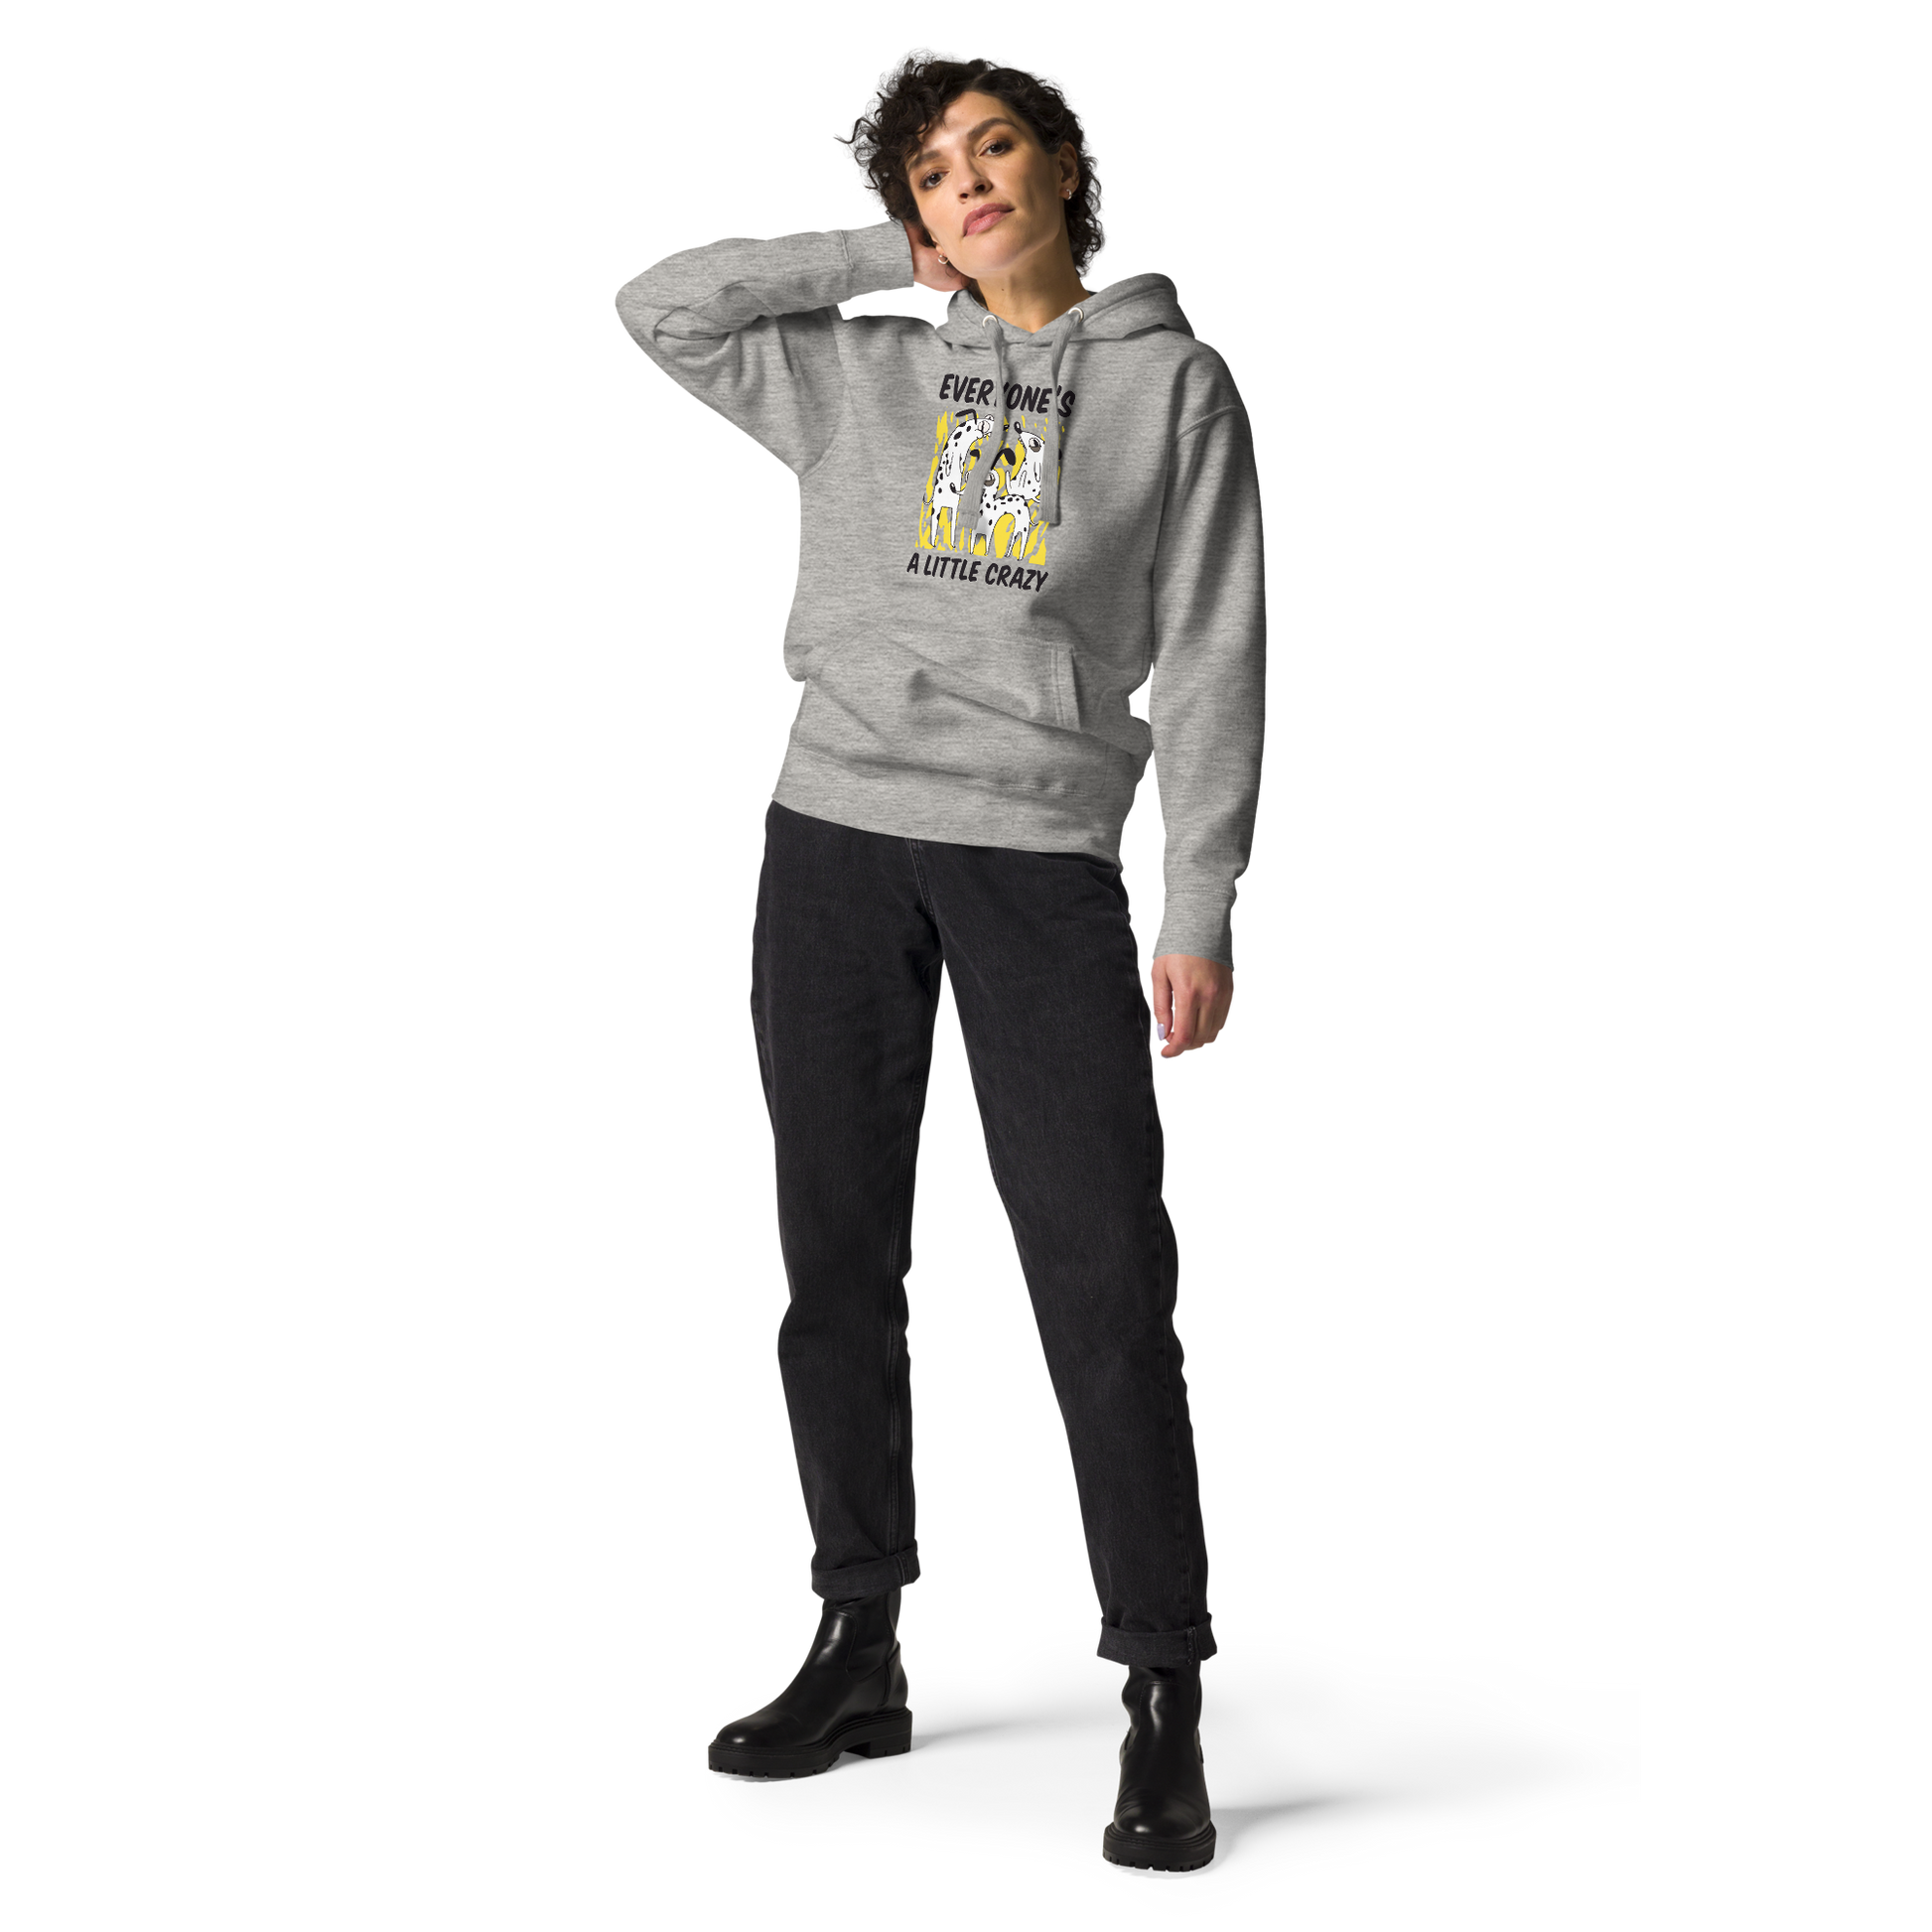 Woman wearing a Carbon Grey Premium Dog Hoodie featuring a Everyone's A Little Crazy graphic on the chest - Funny Graphic Dog Hoodies - Boozy Fox